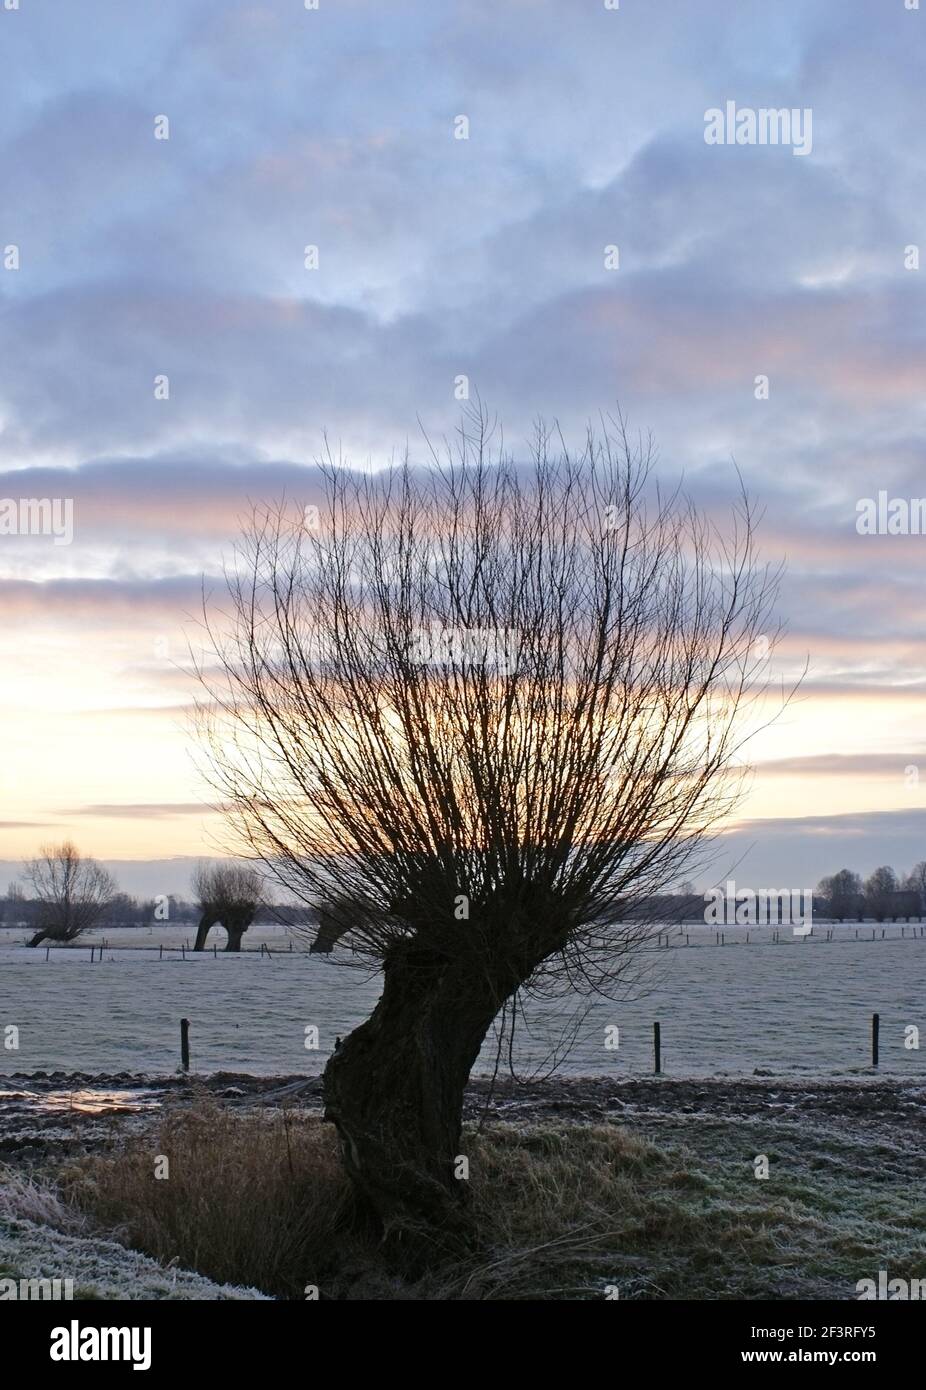 Silhouette of a willow tree on an early, frosted sunrise Stock Photo